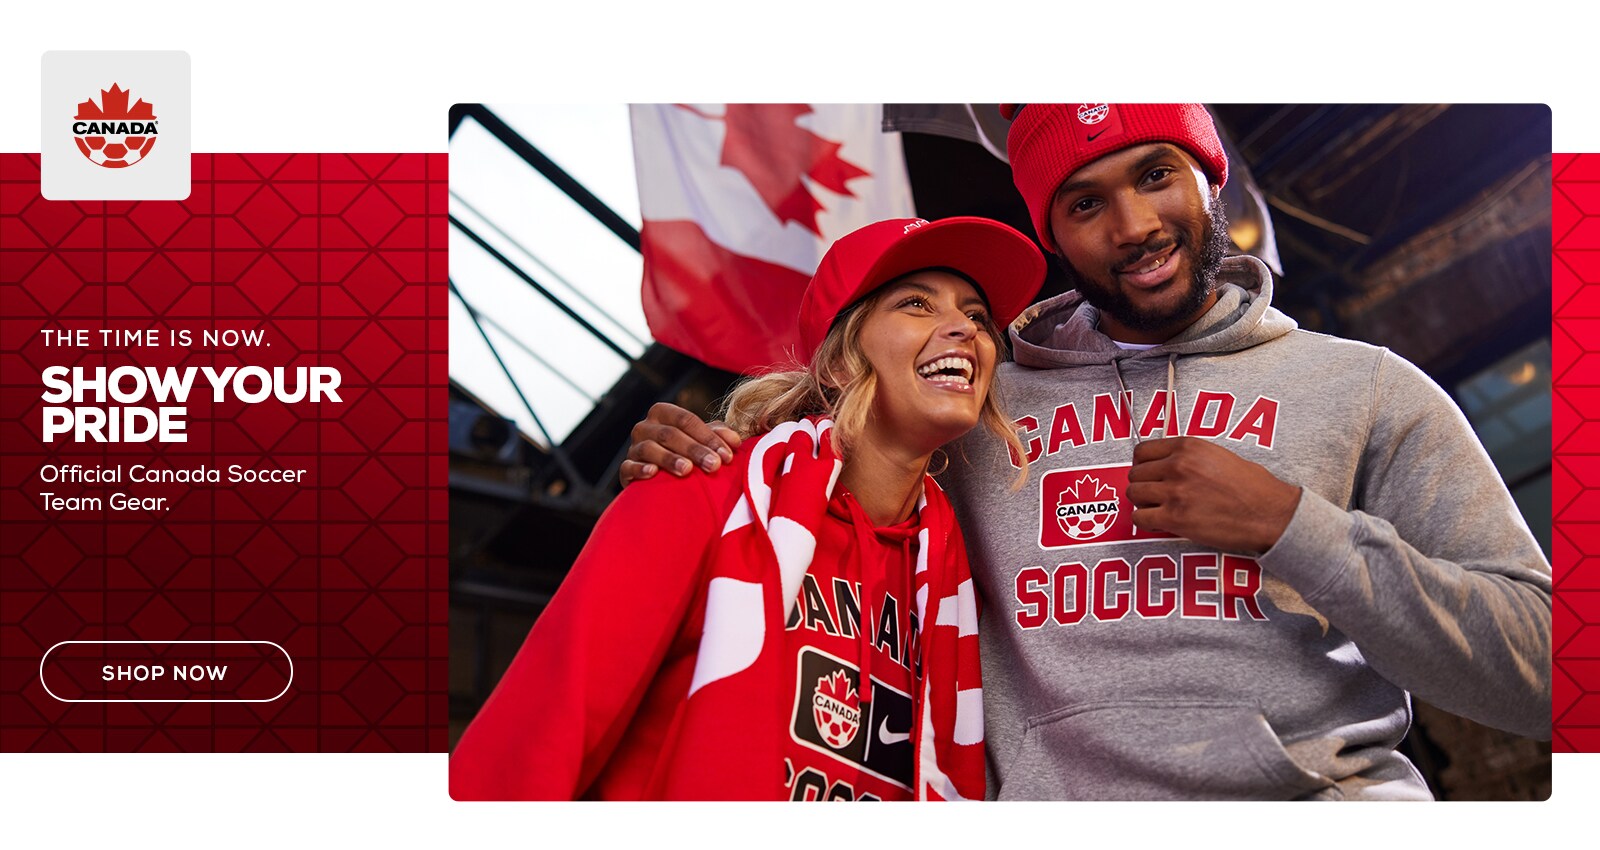 CANADA SOCCER OFFICIAL MERCH. SHOP NOW. WORLD CUP 2022.